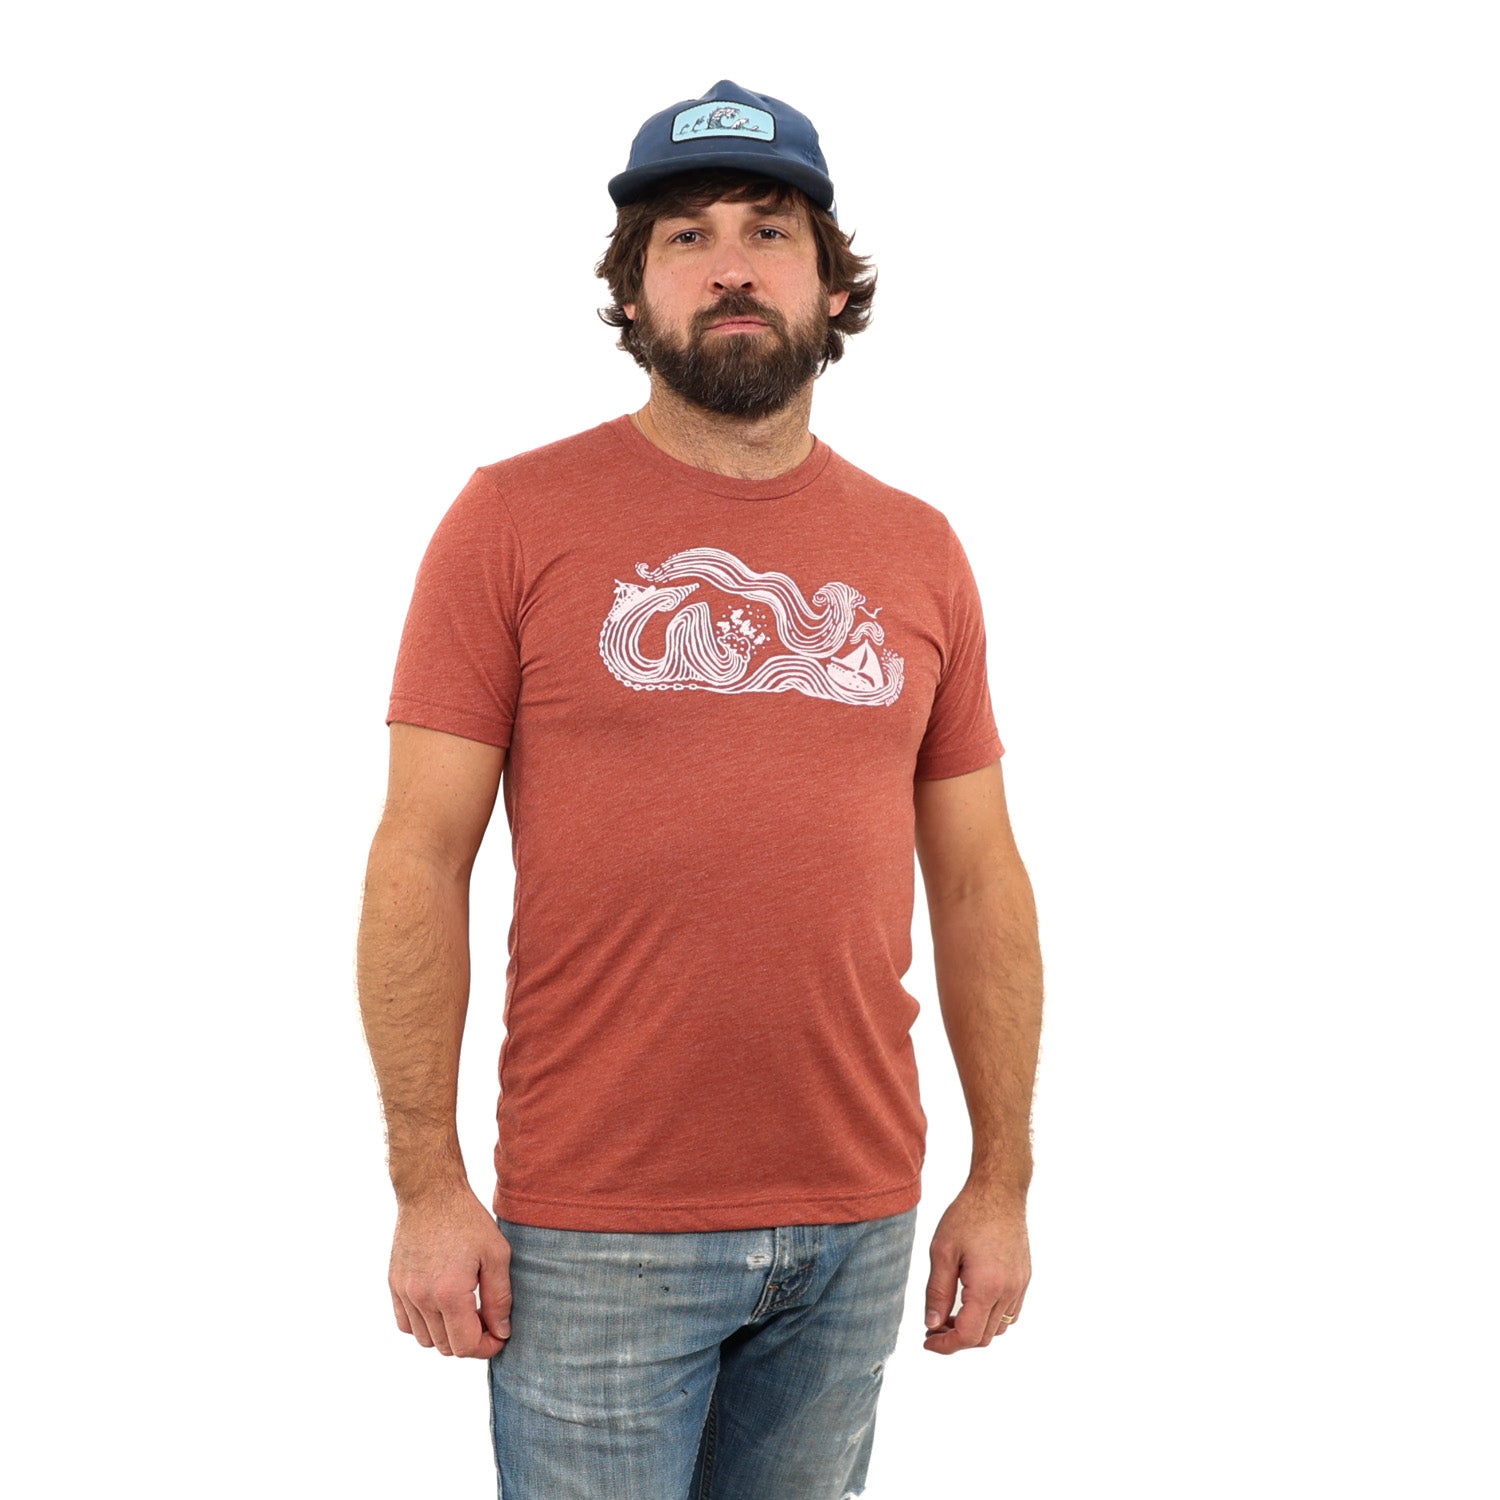 Clay t-shirt with white print of big winds and big seas tossing boats around.